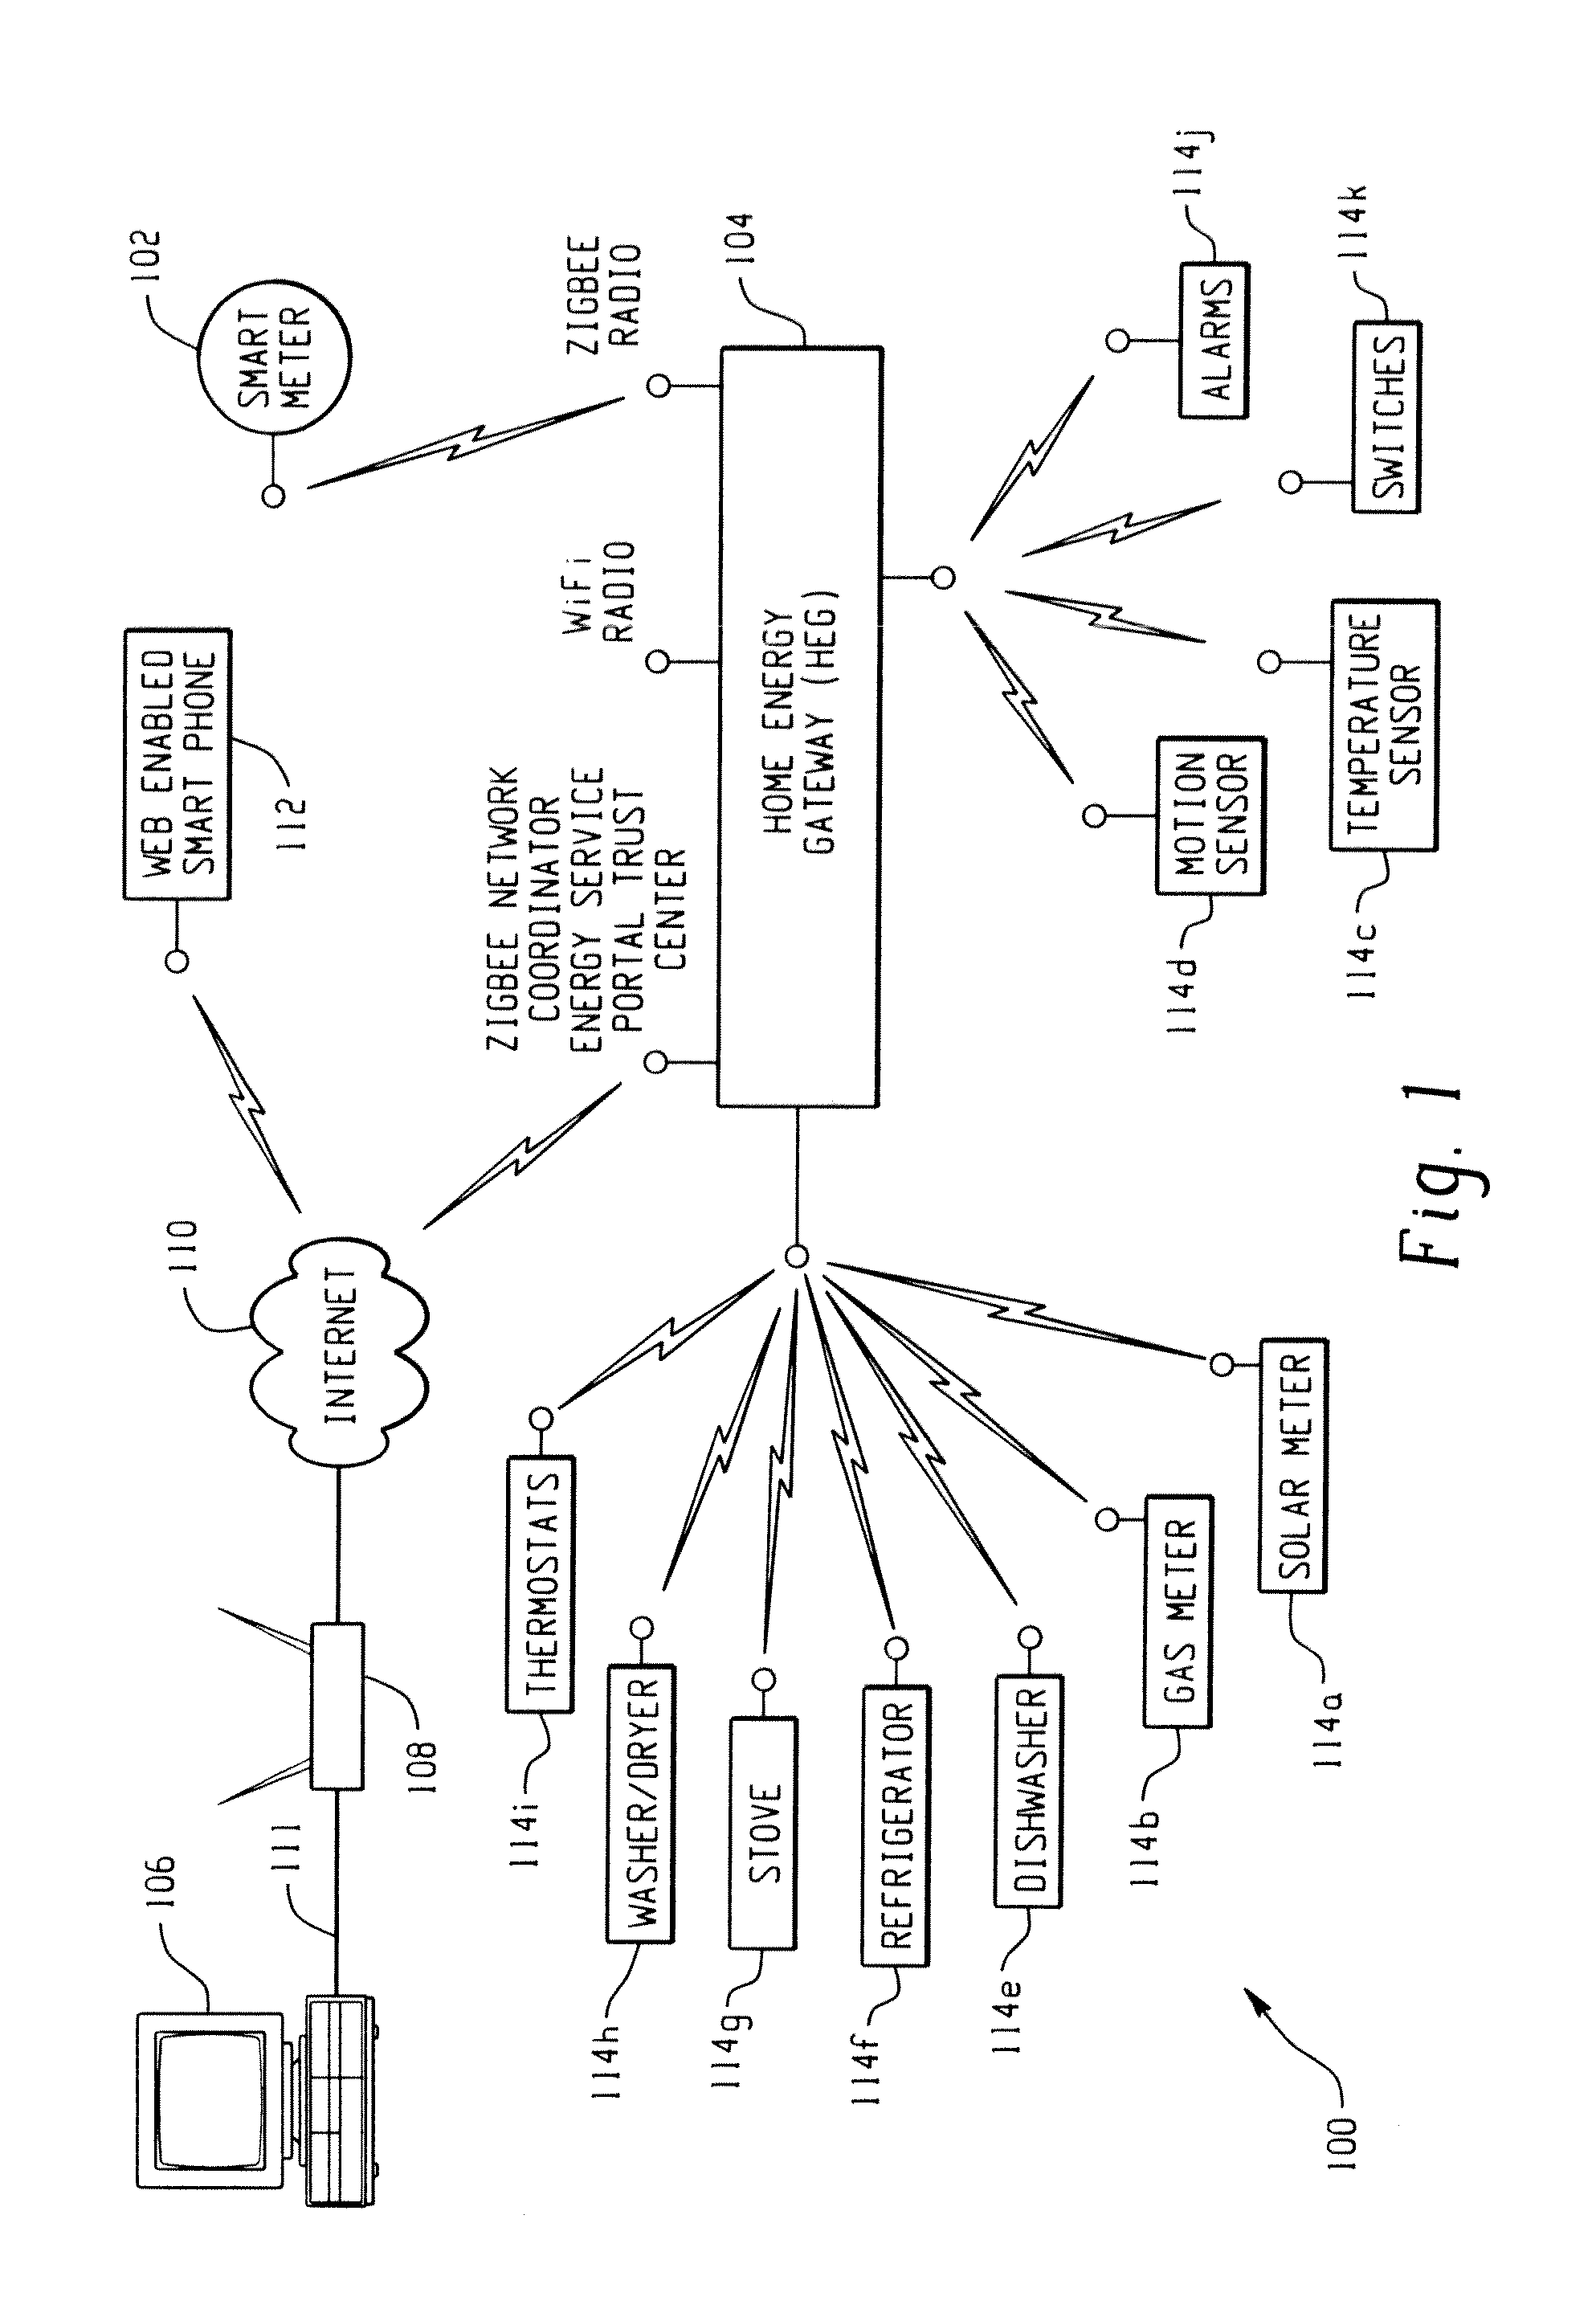 Low cost and flexible energy management system and method for transmitting messages among a plurality of communication networks